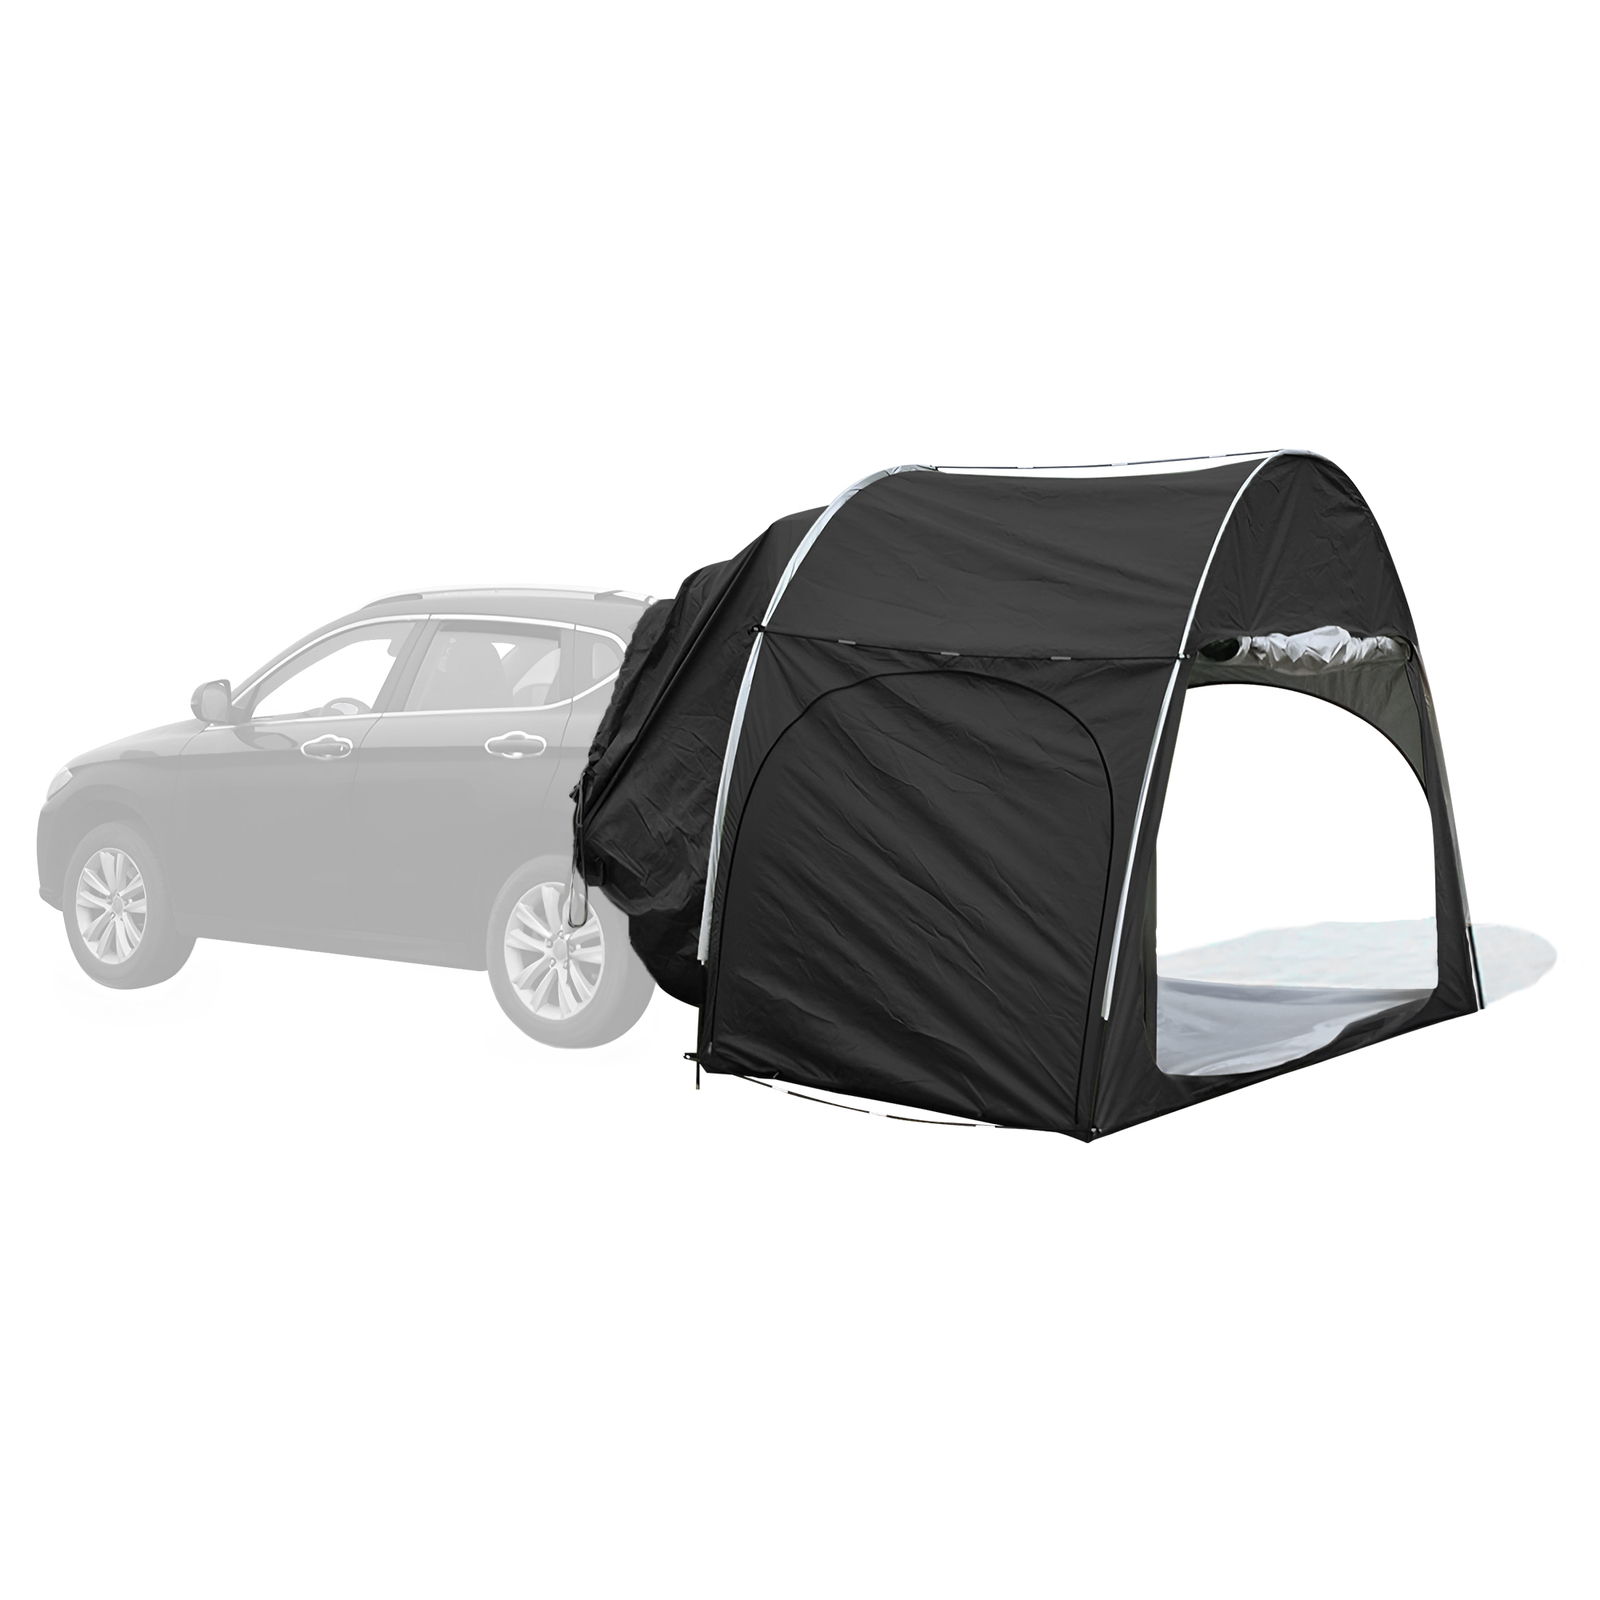 SUV Camping Tent Car Tailgate Shade Side Awning Canopy Portable Outdoor Shelter